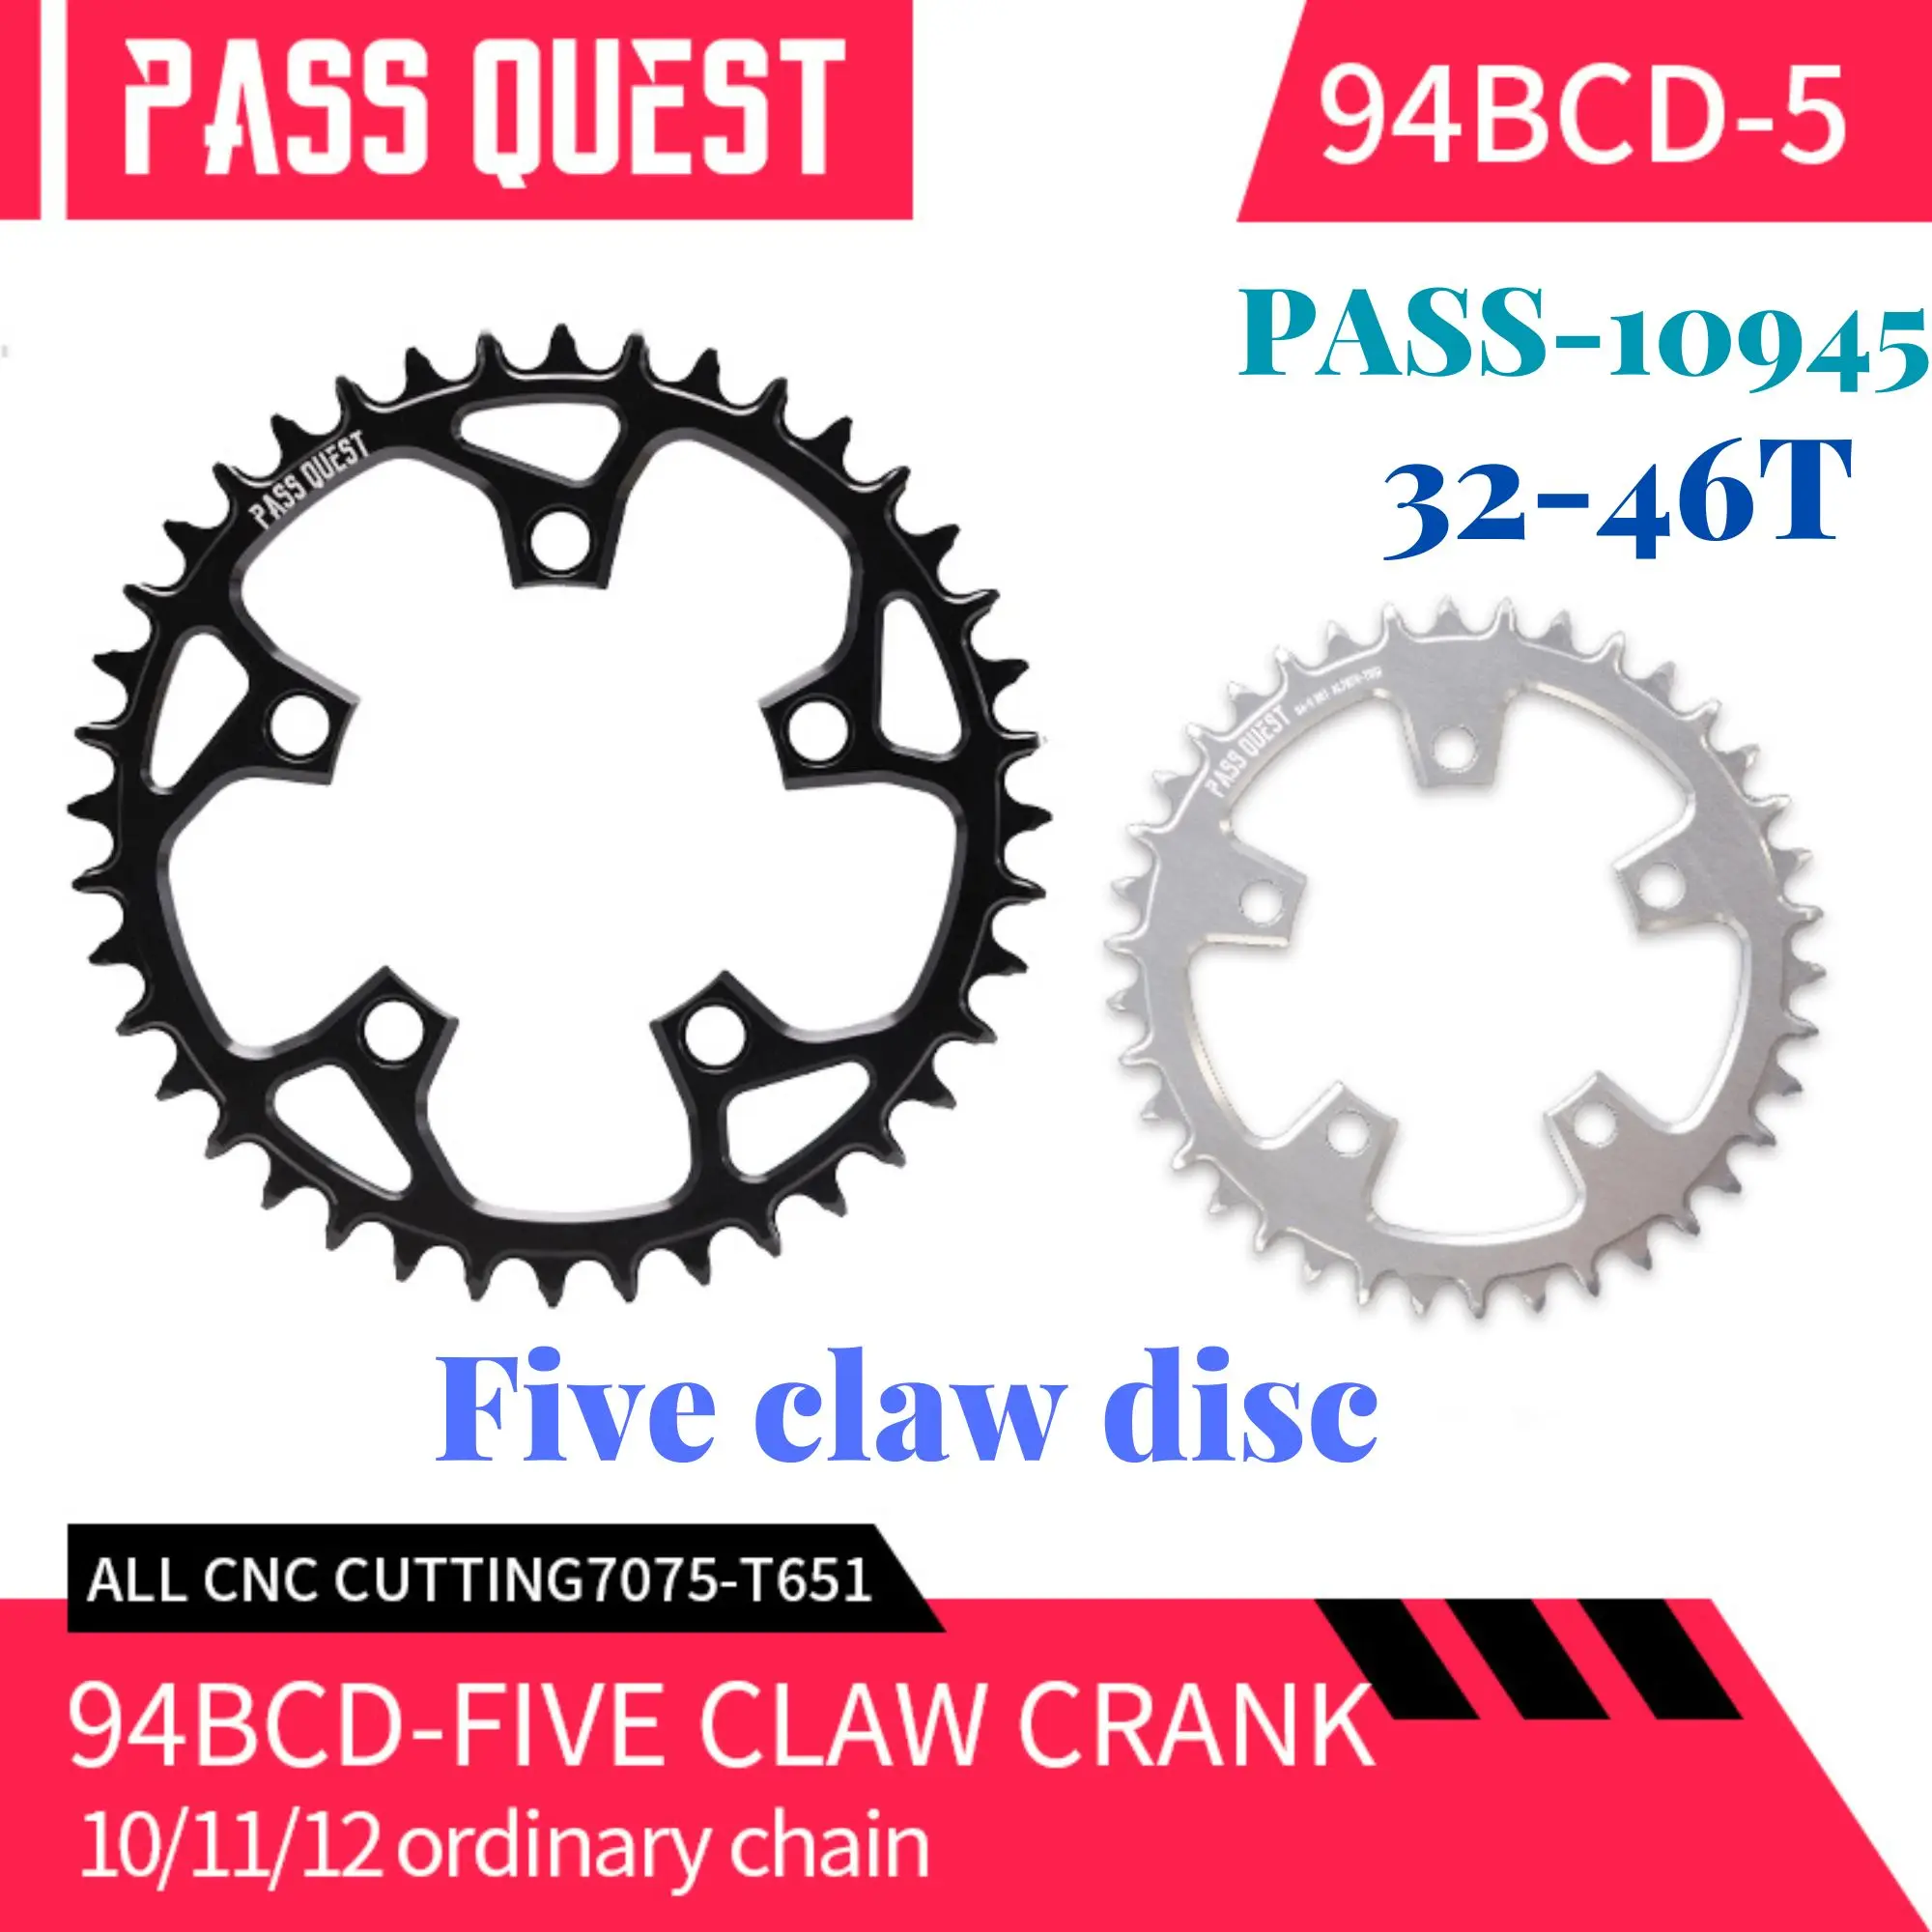 

PASS QUEST 94 bcd chainring 5 bolt ROUND Narrow Wide Chainring 32/34/36/38/40/42/44/46T 10/11/12 speed for5 Claw Crank Bikeparts